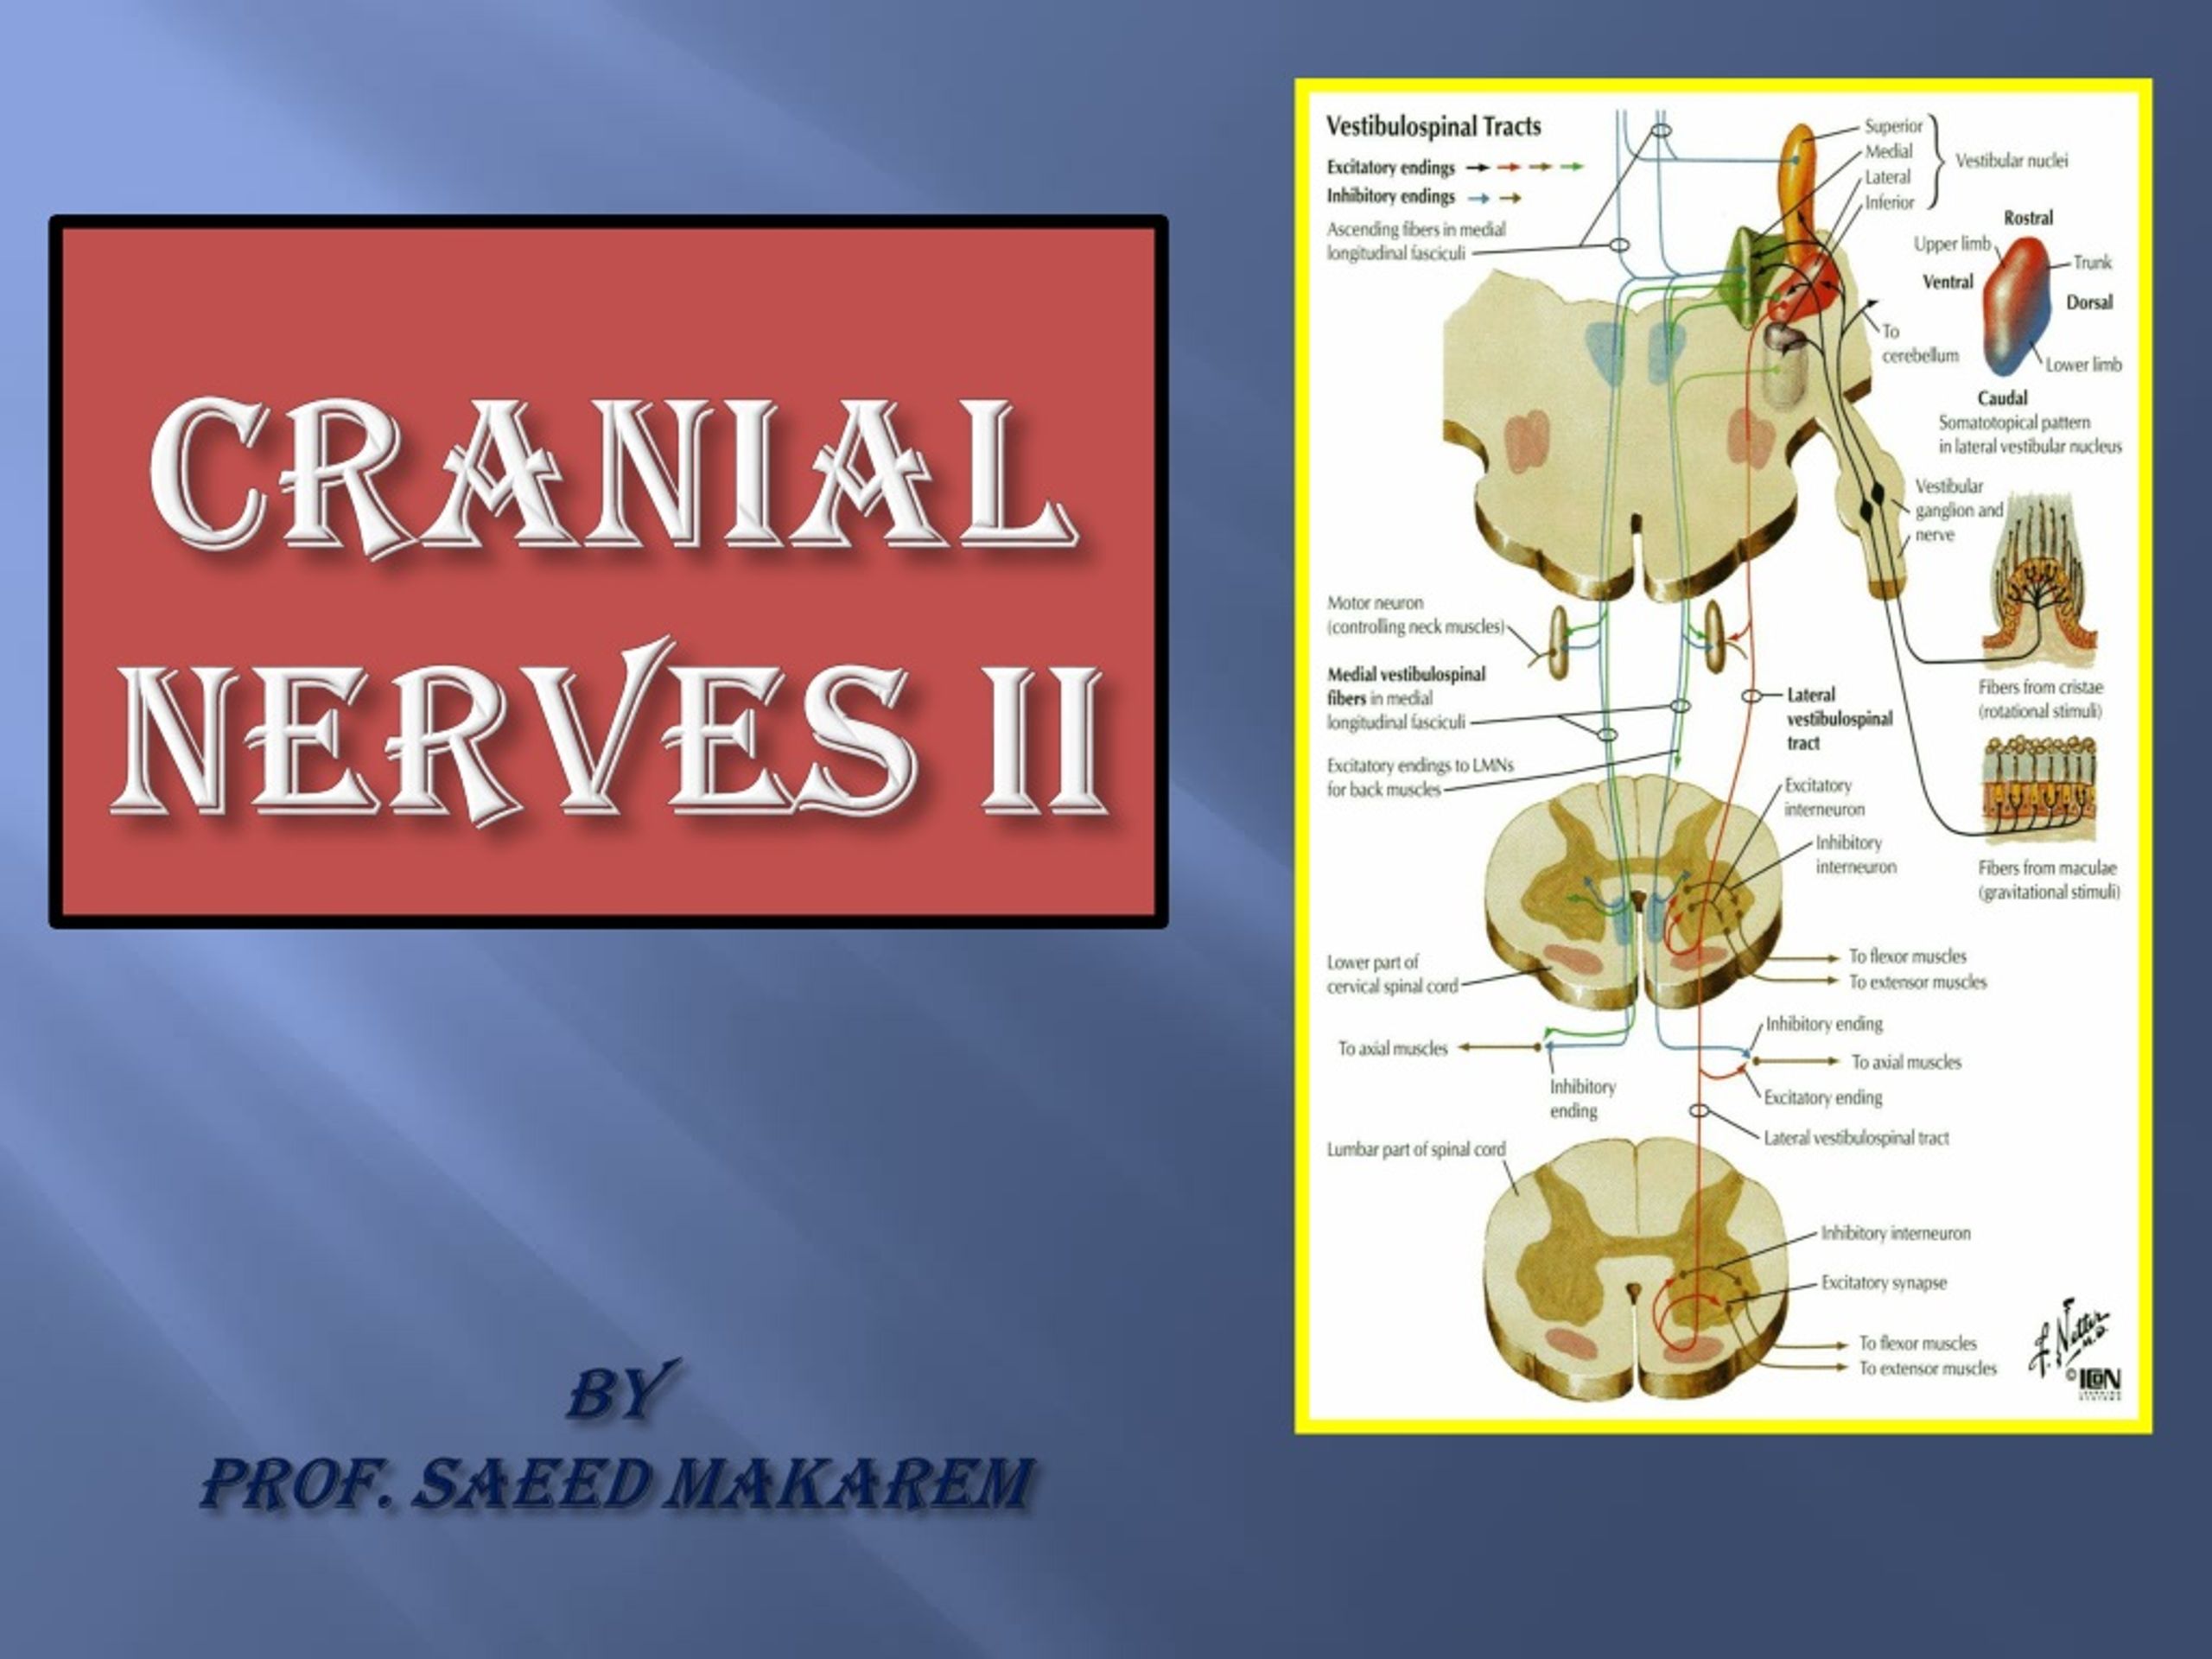 Ppt Cranial Nerves I By Prof Saeed Makarem Powerpoint Presentation Free Download Id1384286 1964